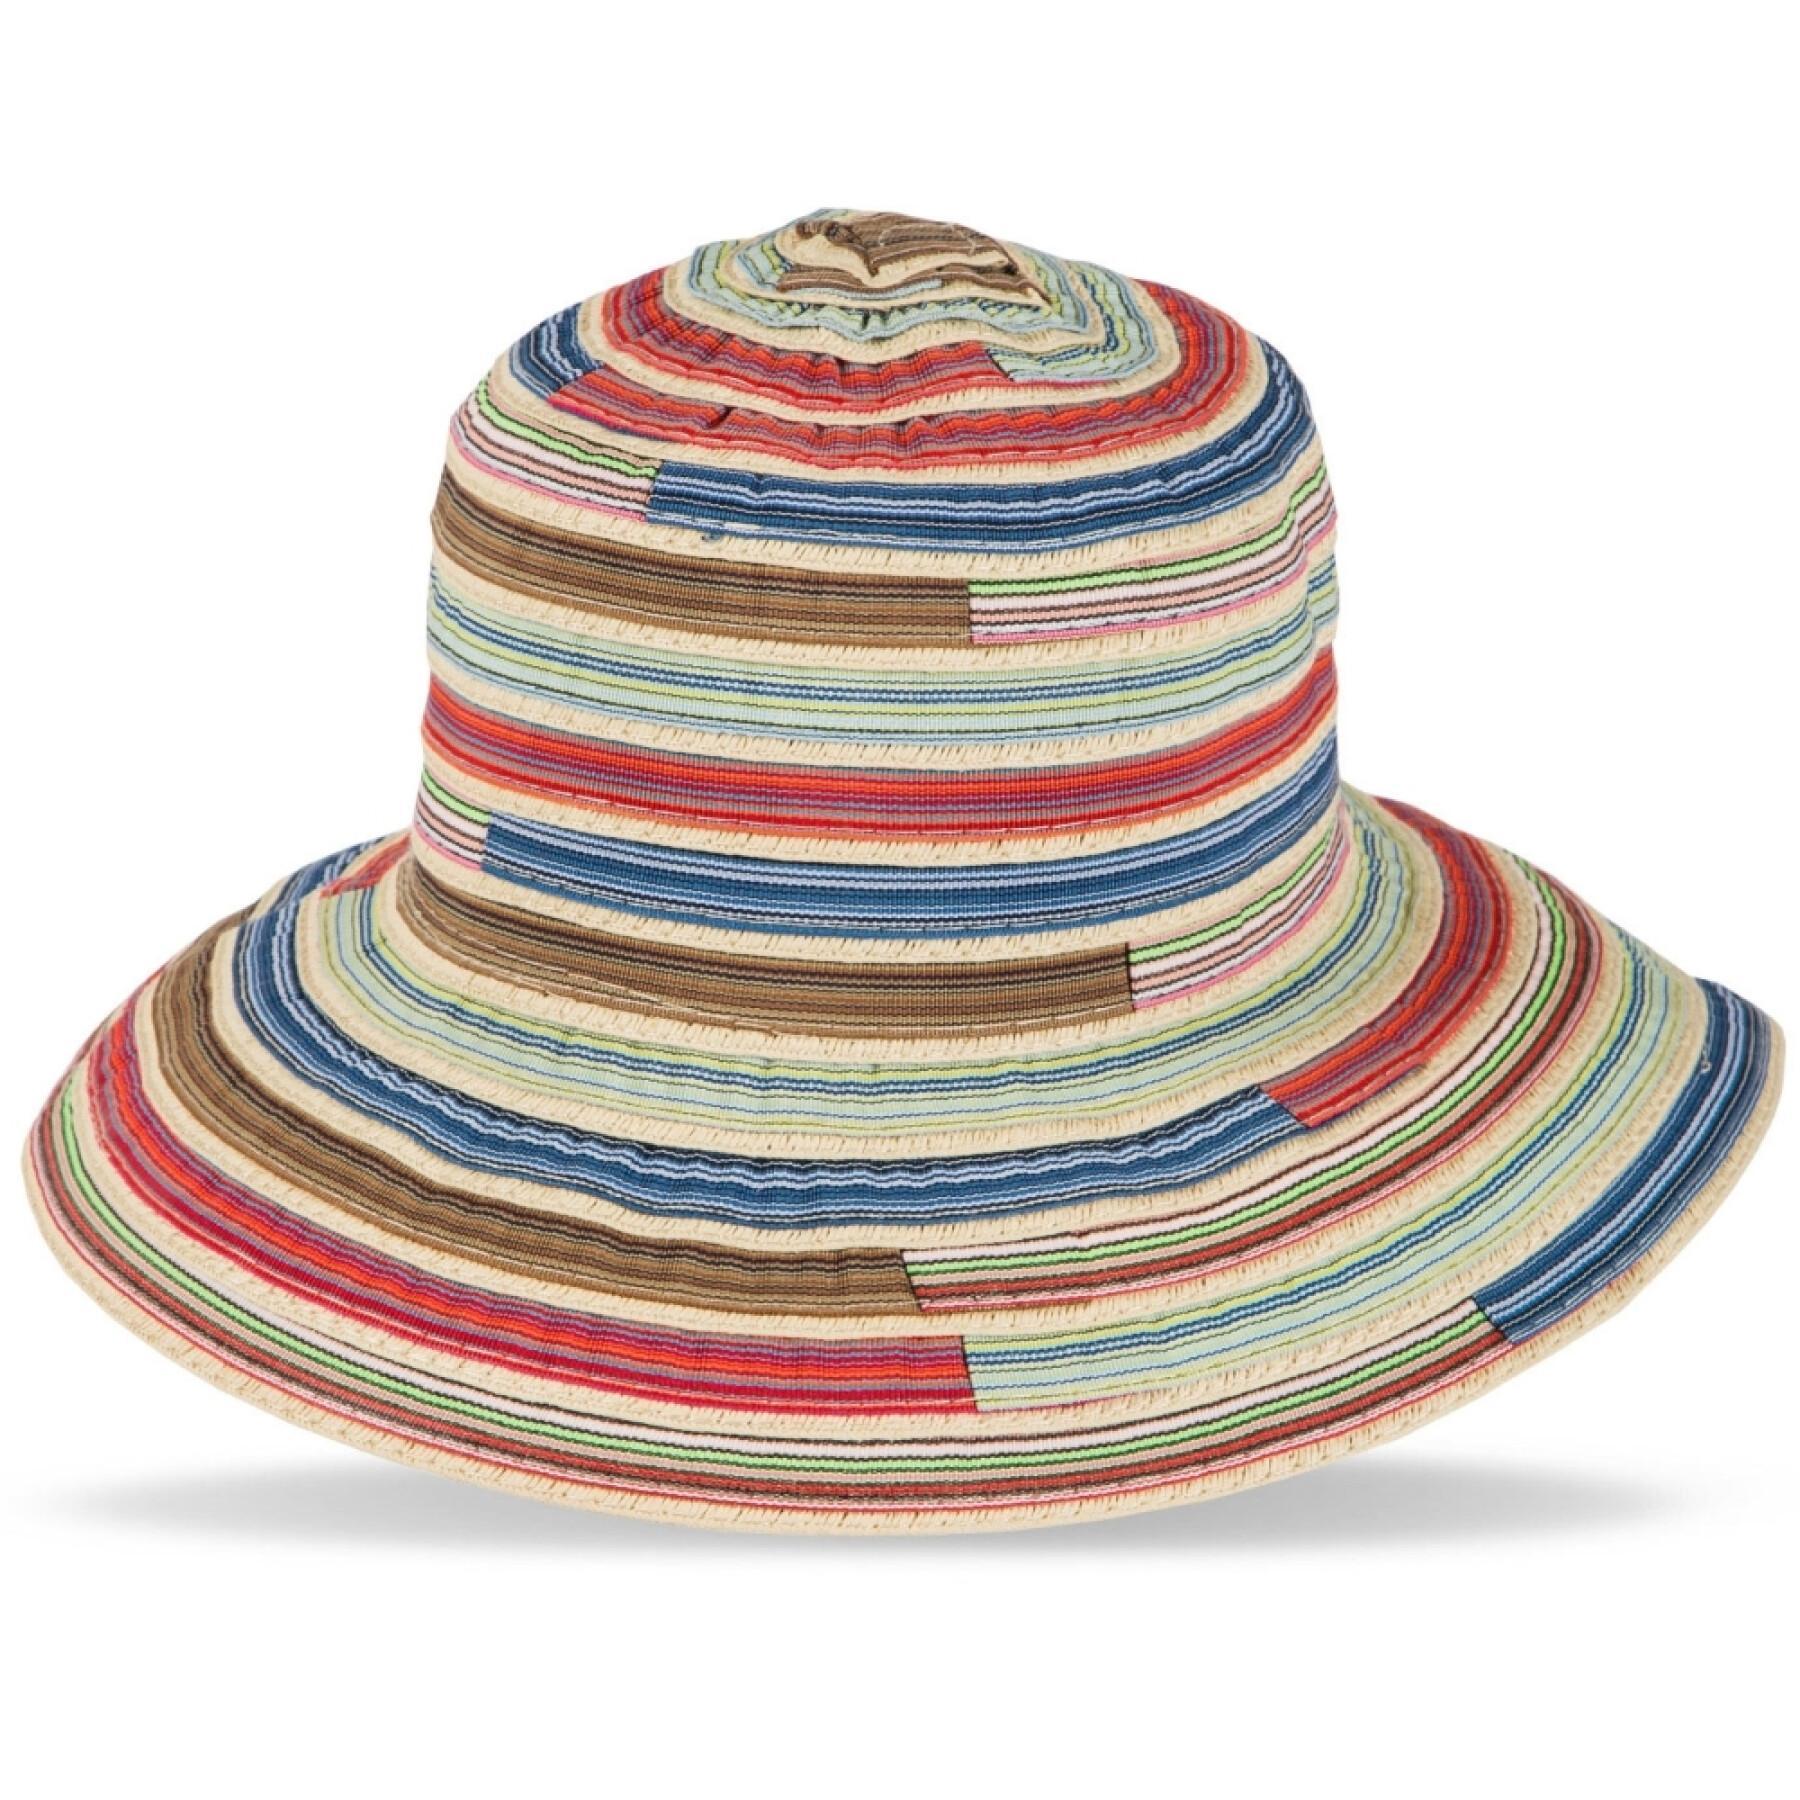 Woman's striped hat Solid